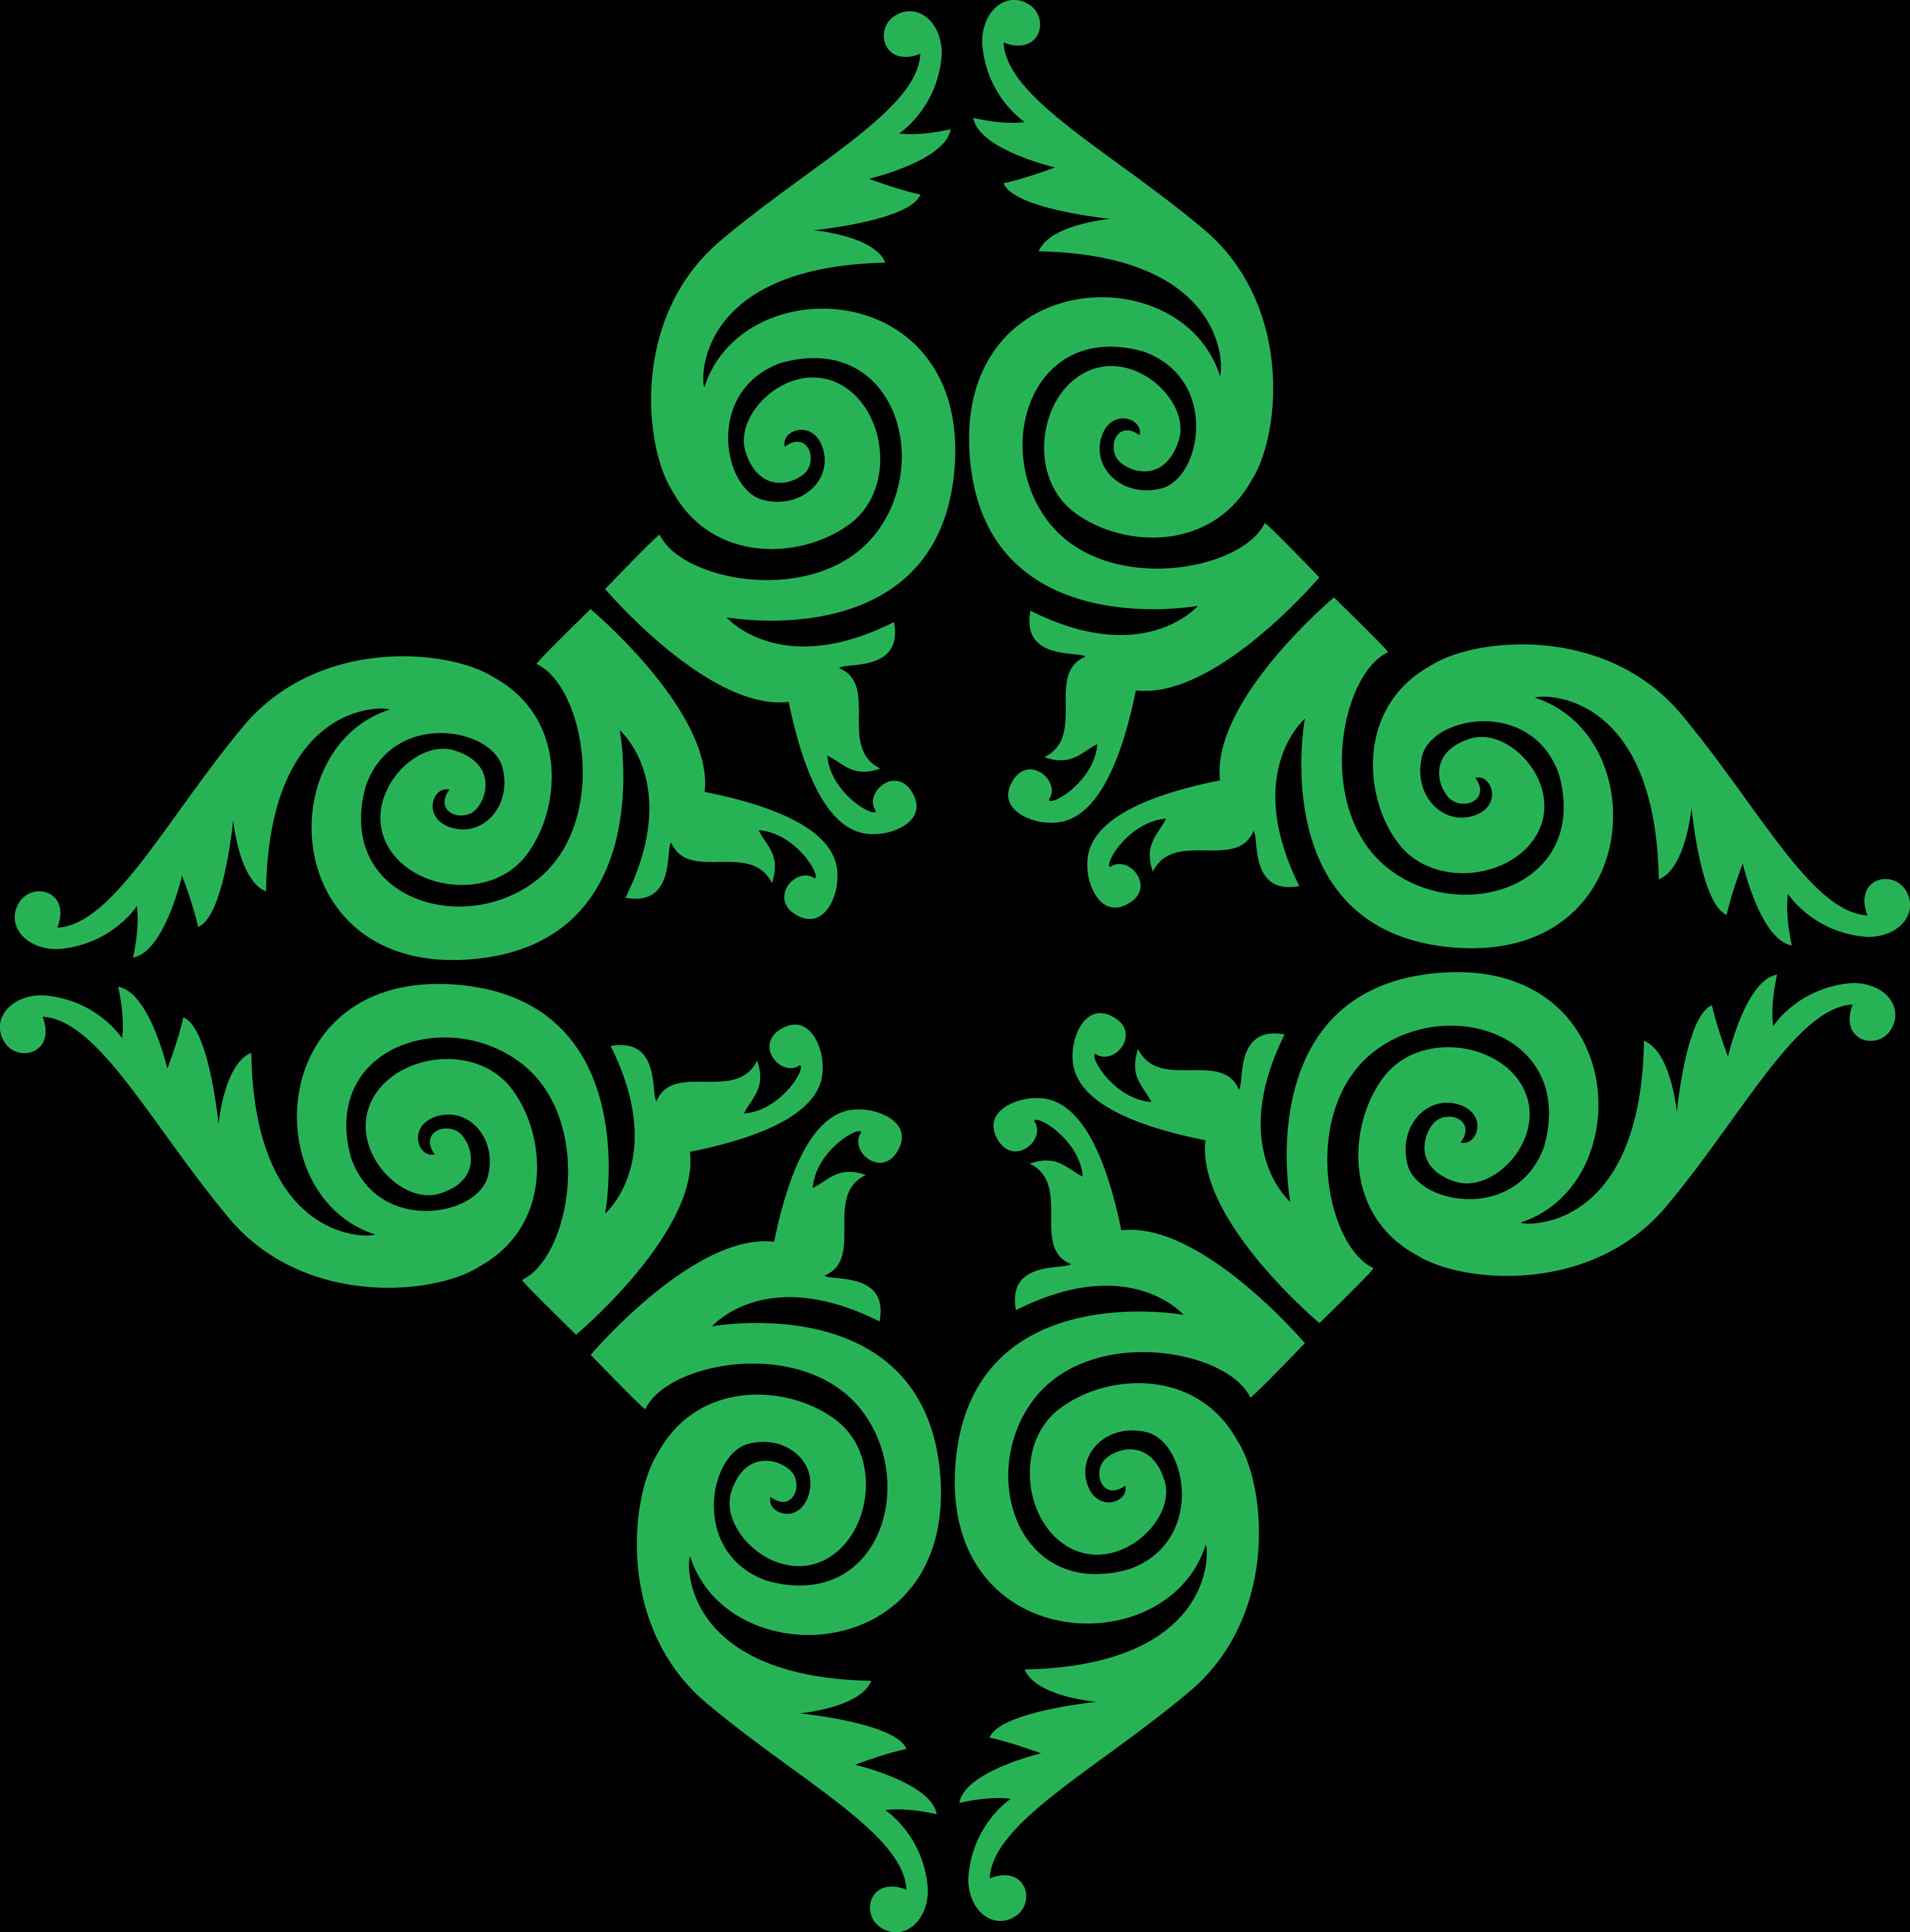 A Green Design On A Black Background